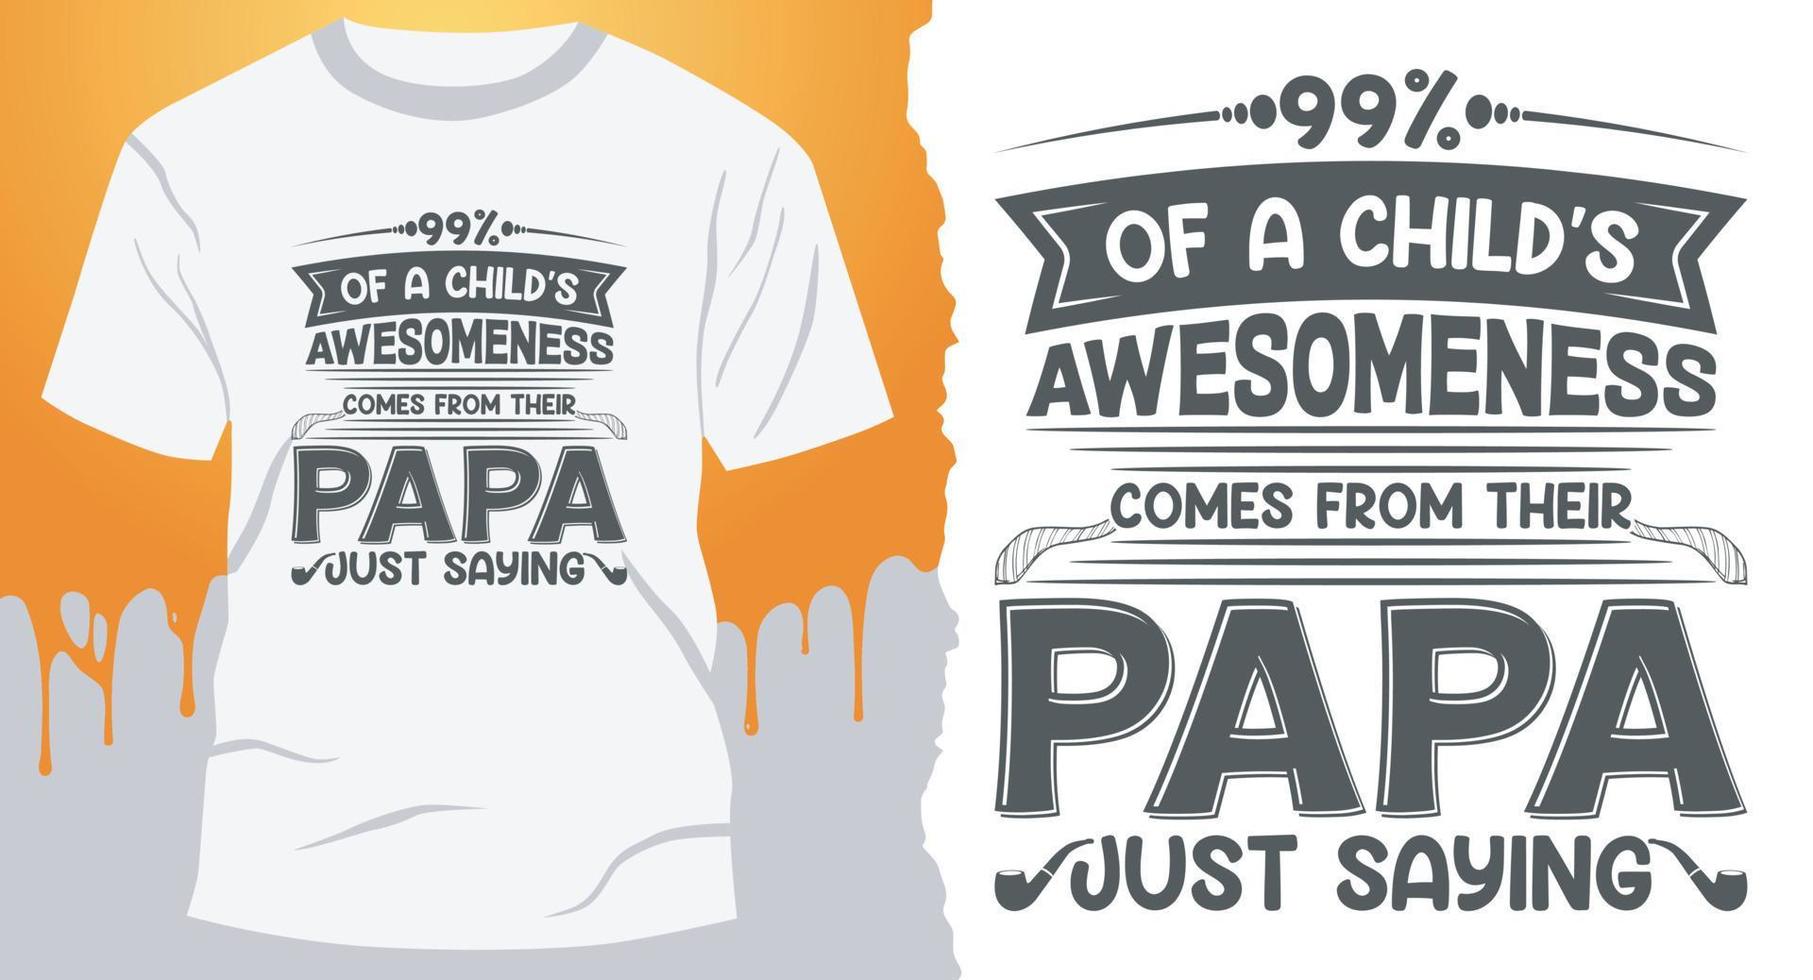 Fater's Day T-Shirt Design.  Best Vector Design for Father's Day T-Shirt